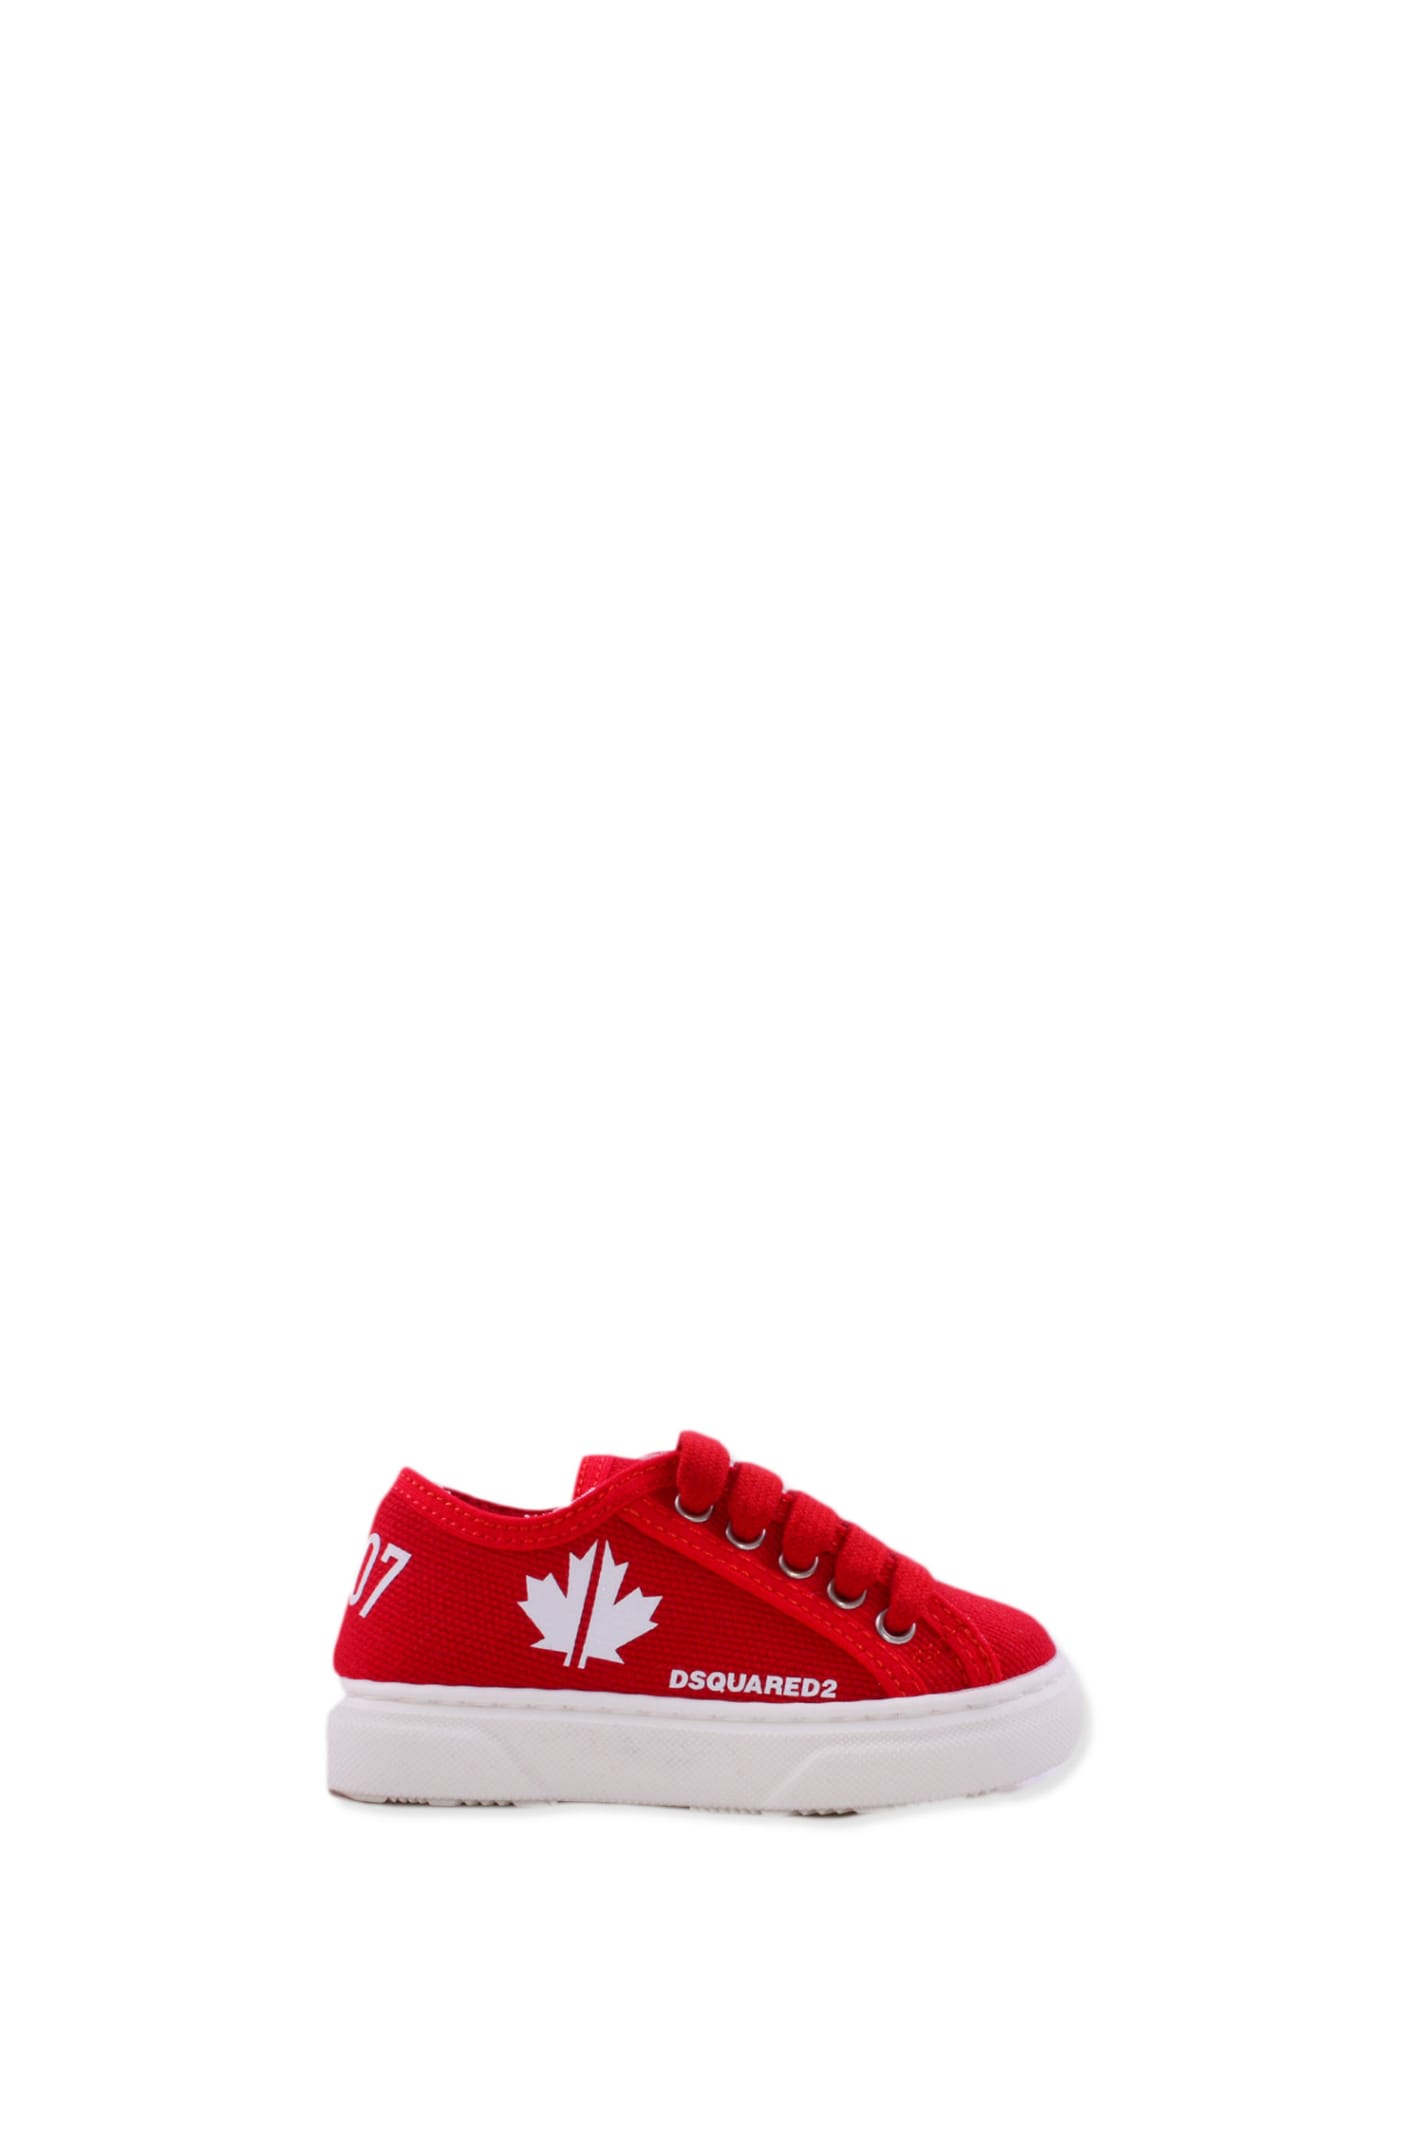 DSQUARED2 SNEAKERS WITH COTTON LOGO